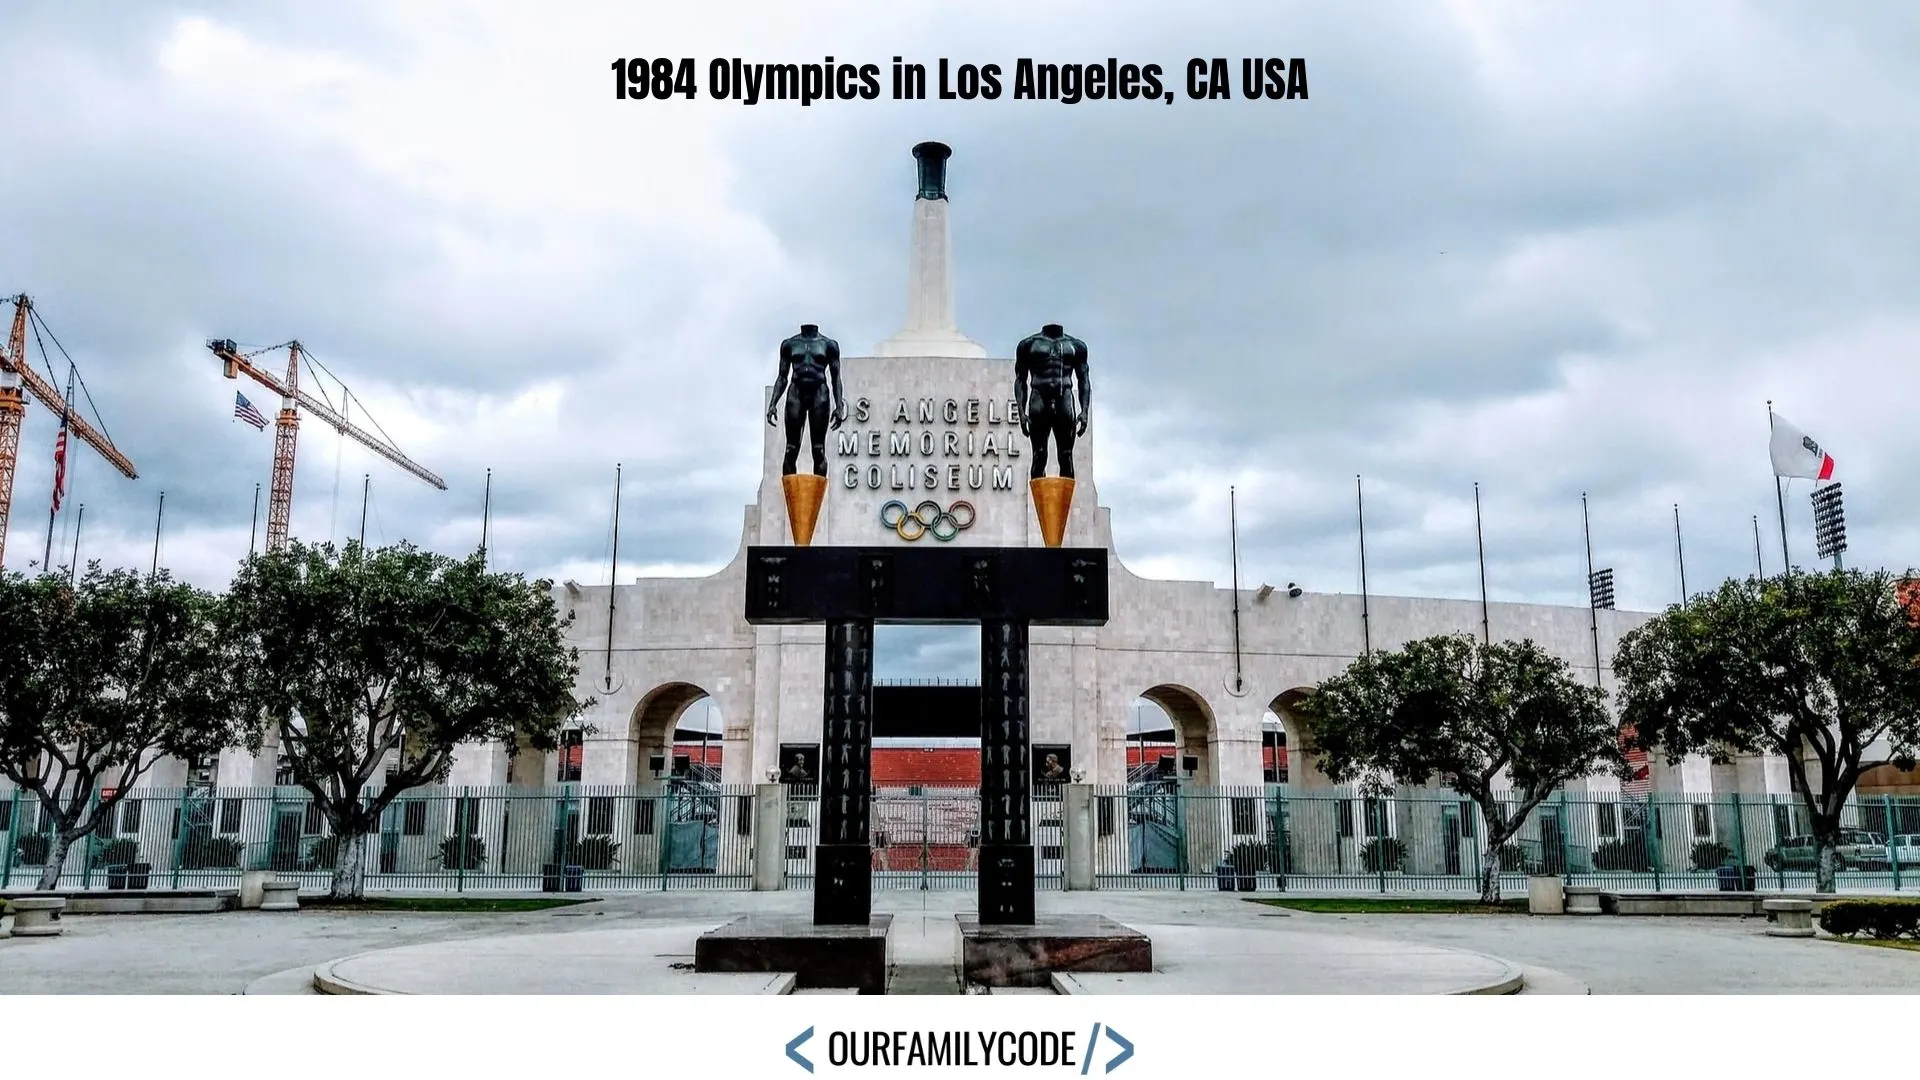 The Los Angeles Memorial Coliseum held the opening and closing ceremonies as well as the athletics events for the 1932 and 1984 Summer Olympics hosted by Los Angeles, California.